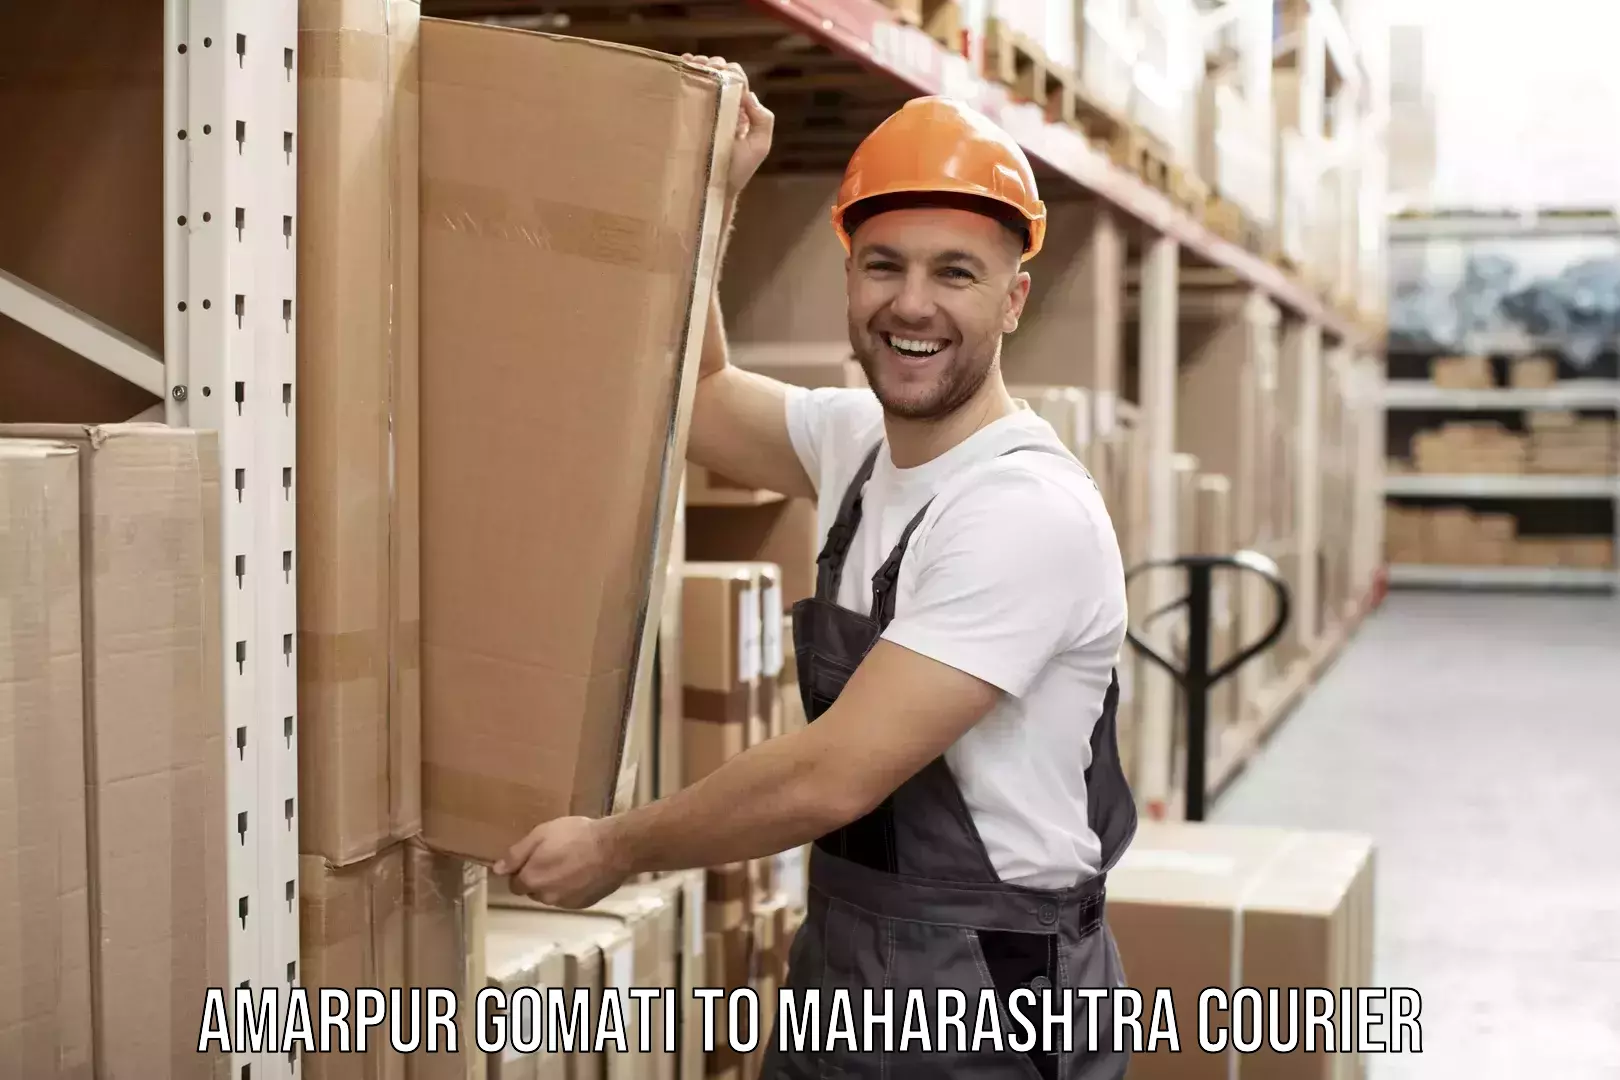 Quality relocation services Amarpur Gomati to Pune